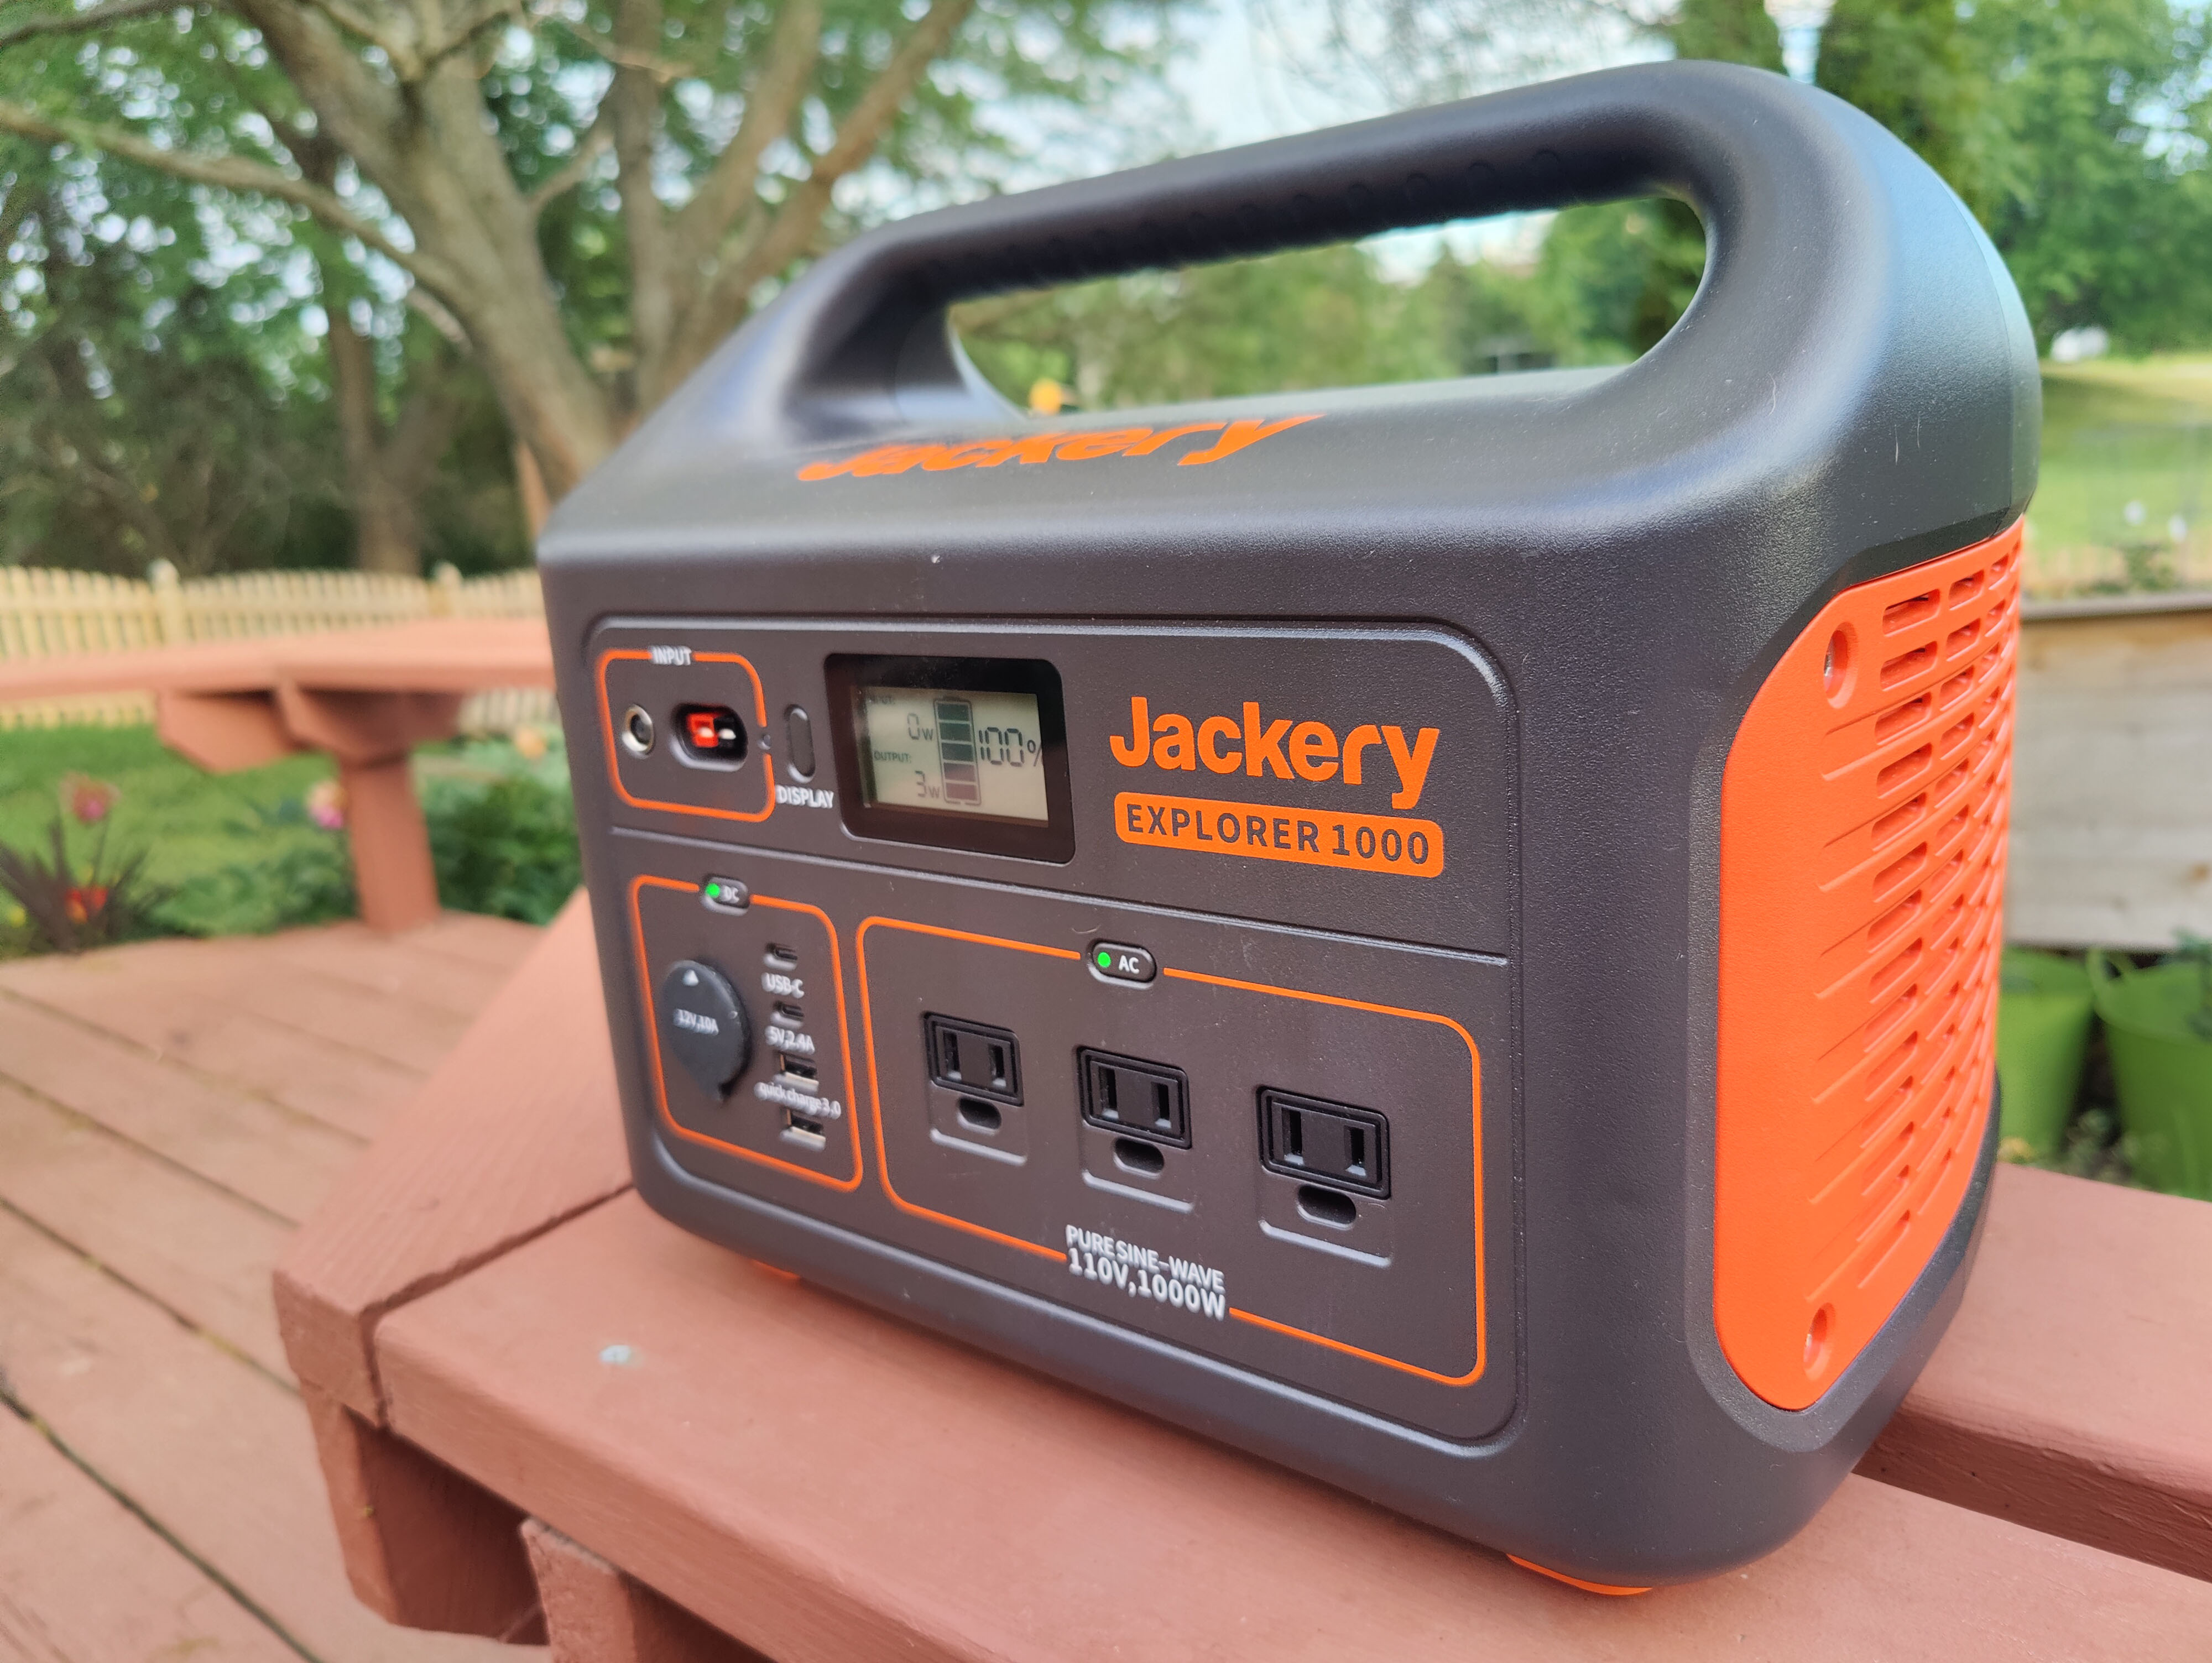 Jackery Explorer 1000 Review: More capacity and outputs for adventures